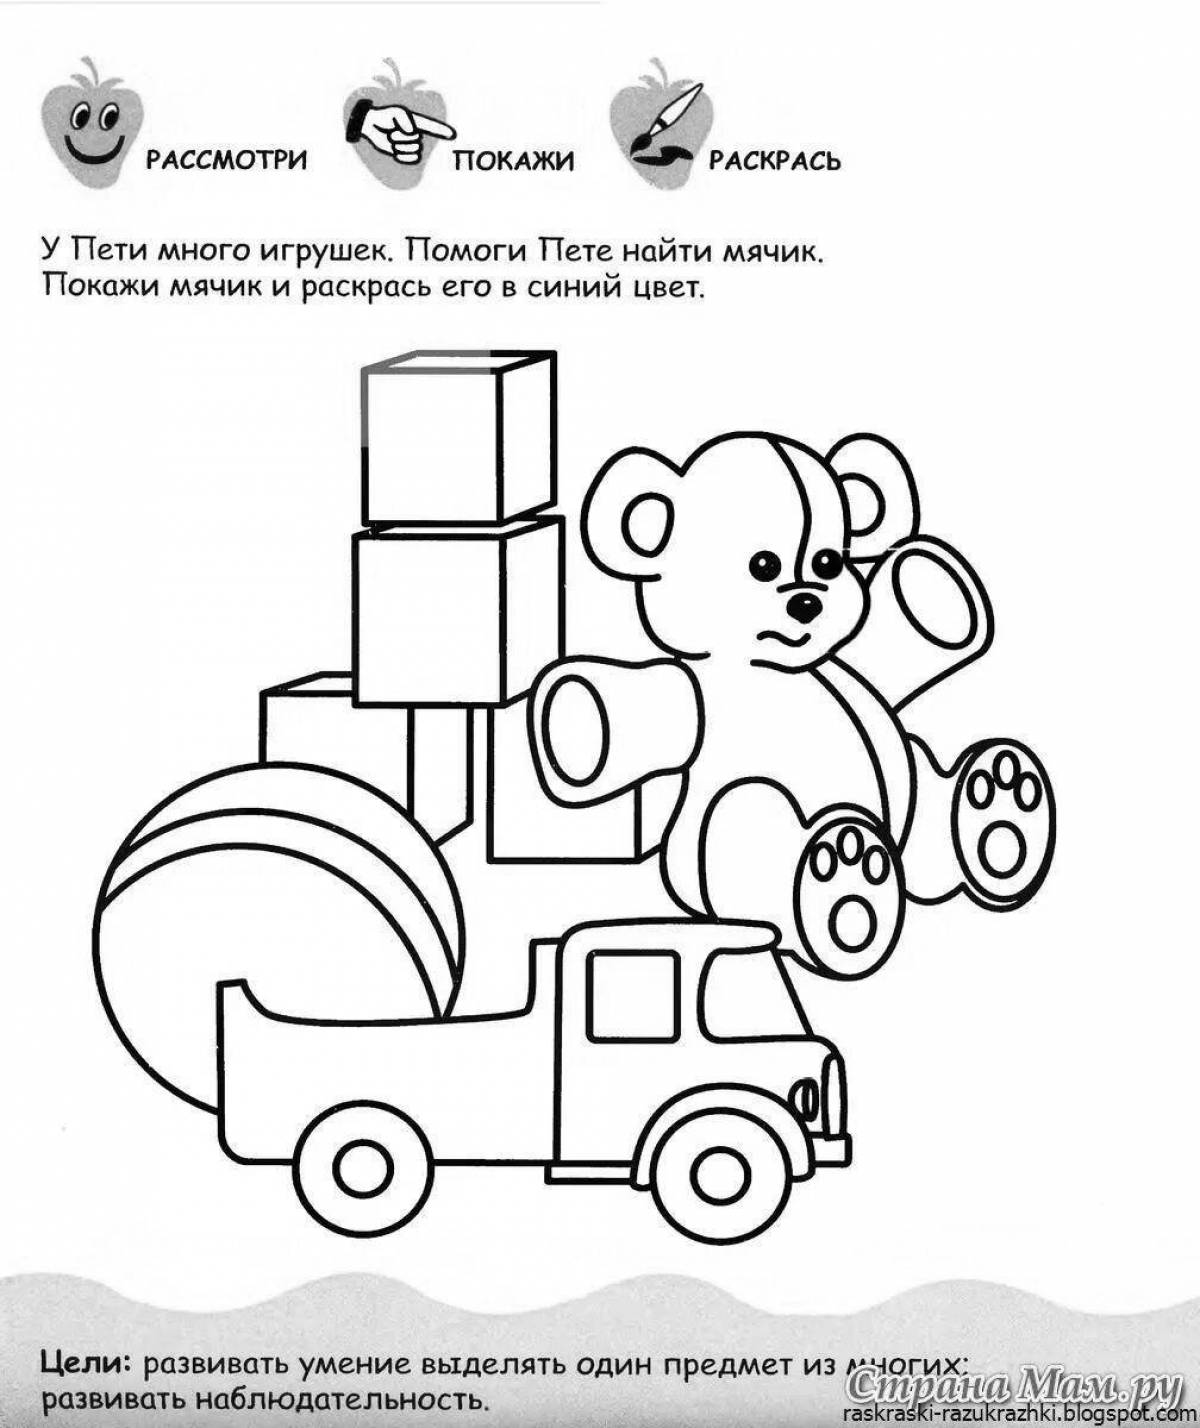 An interesting coloring book for children that develops